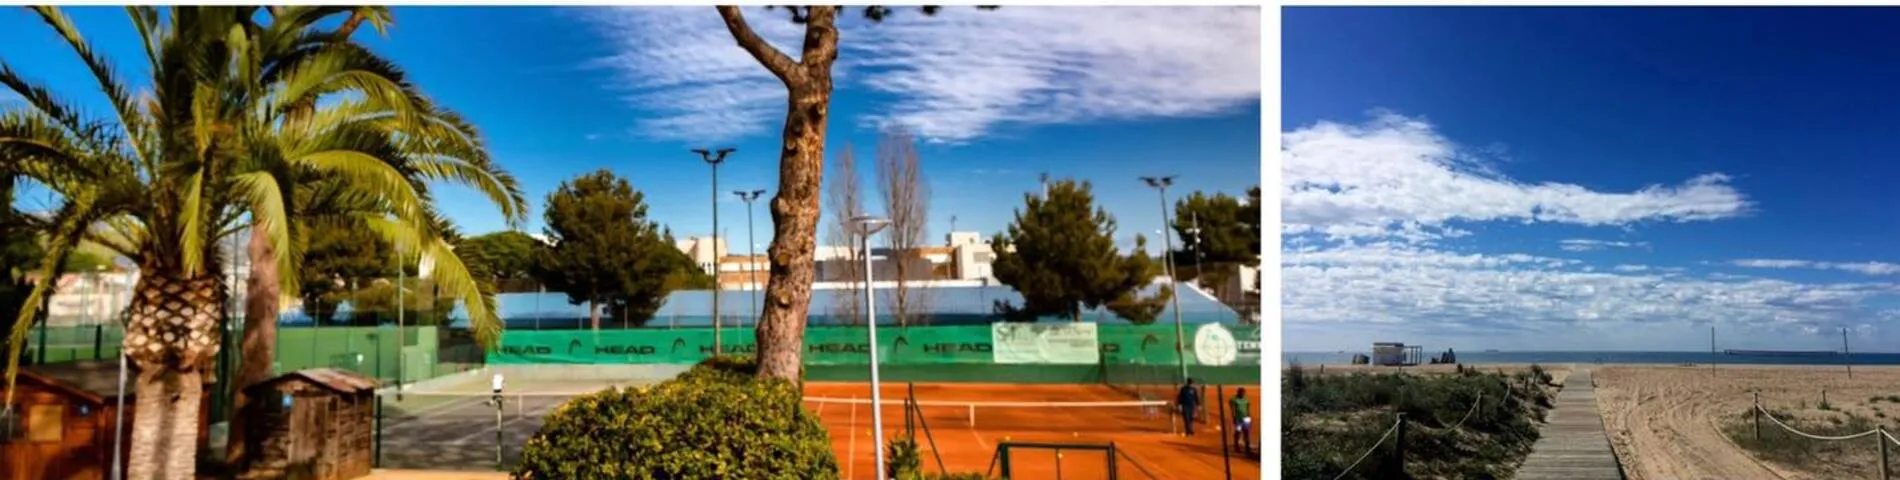 Barcelona Tennis Academy picture 1